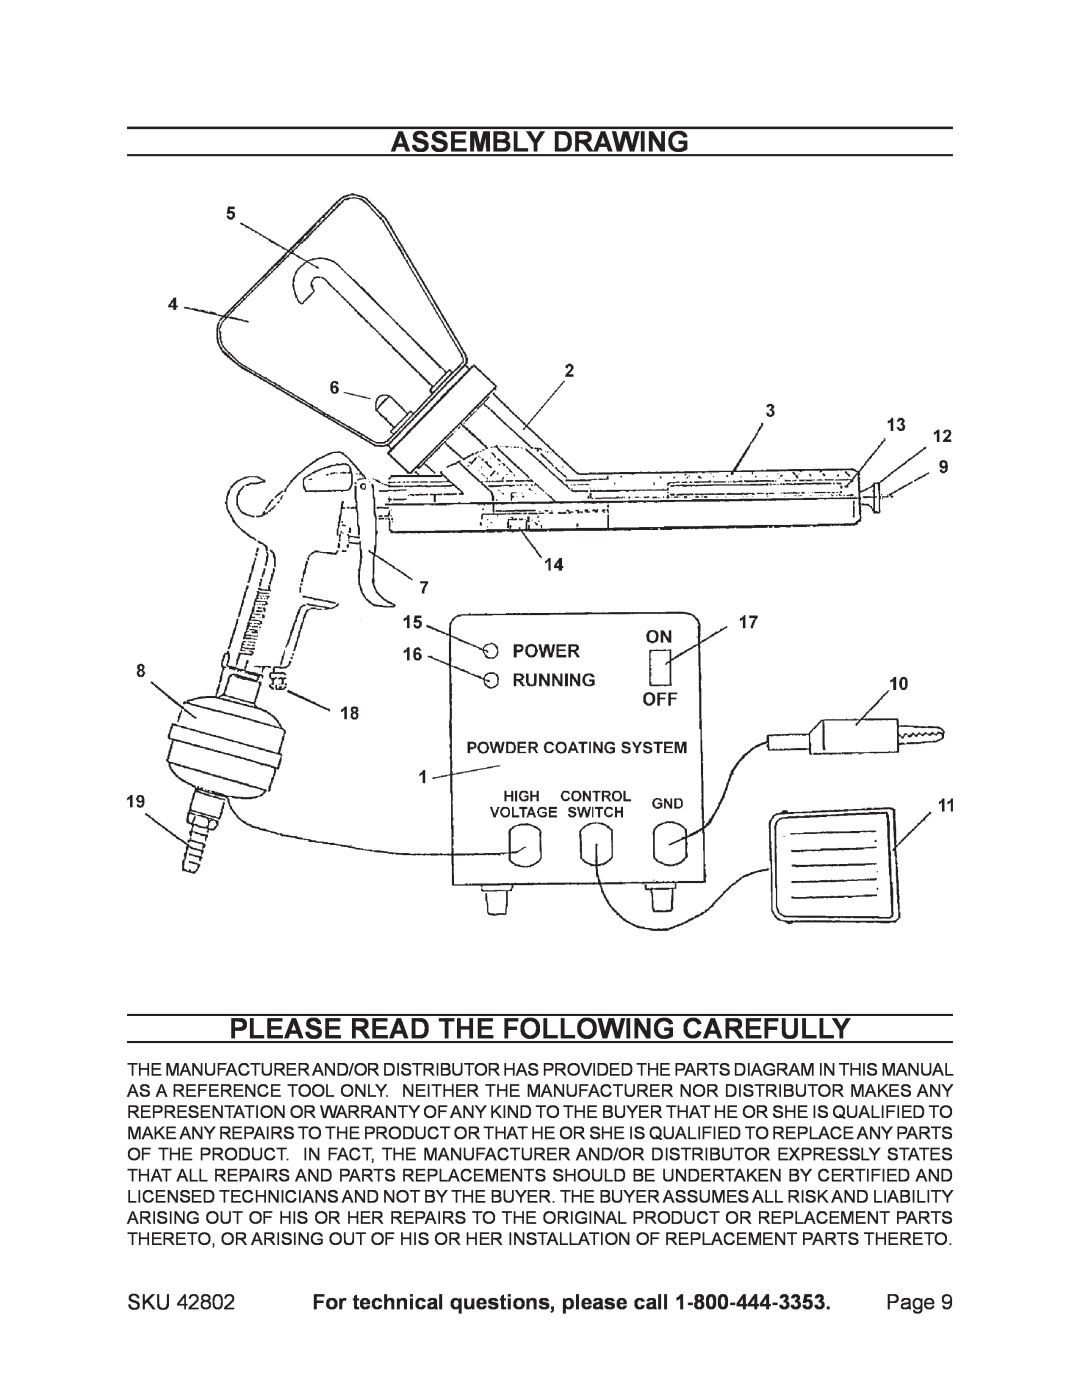 Chicago Electric 42802 Assembly Drawing PLEASE READ THE FOLLOWING CAREFULLY, For technical questions, please call 